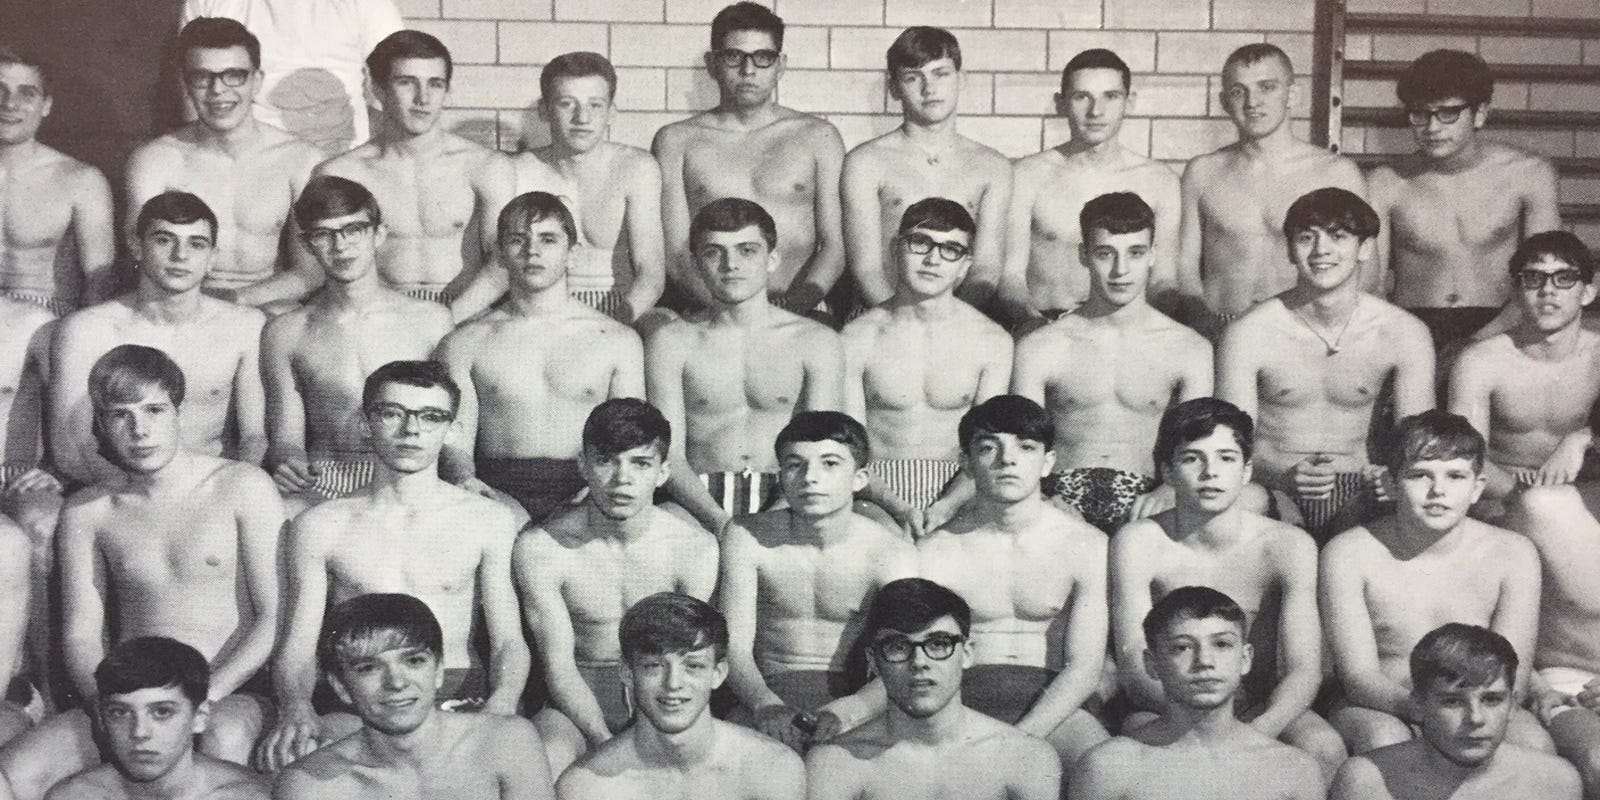 Vintage 70s Naturist Nude - Andreatta: When boys swam nude in gym class